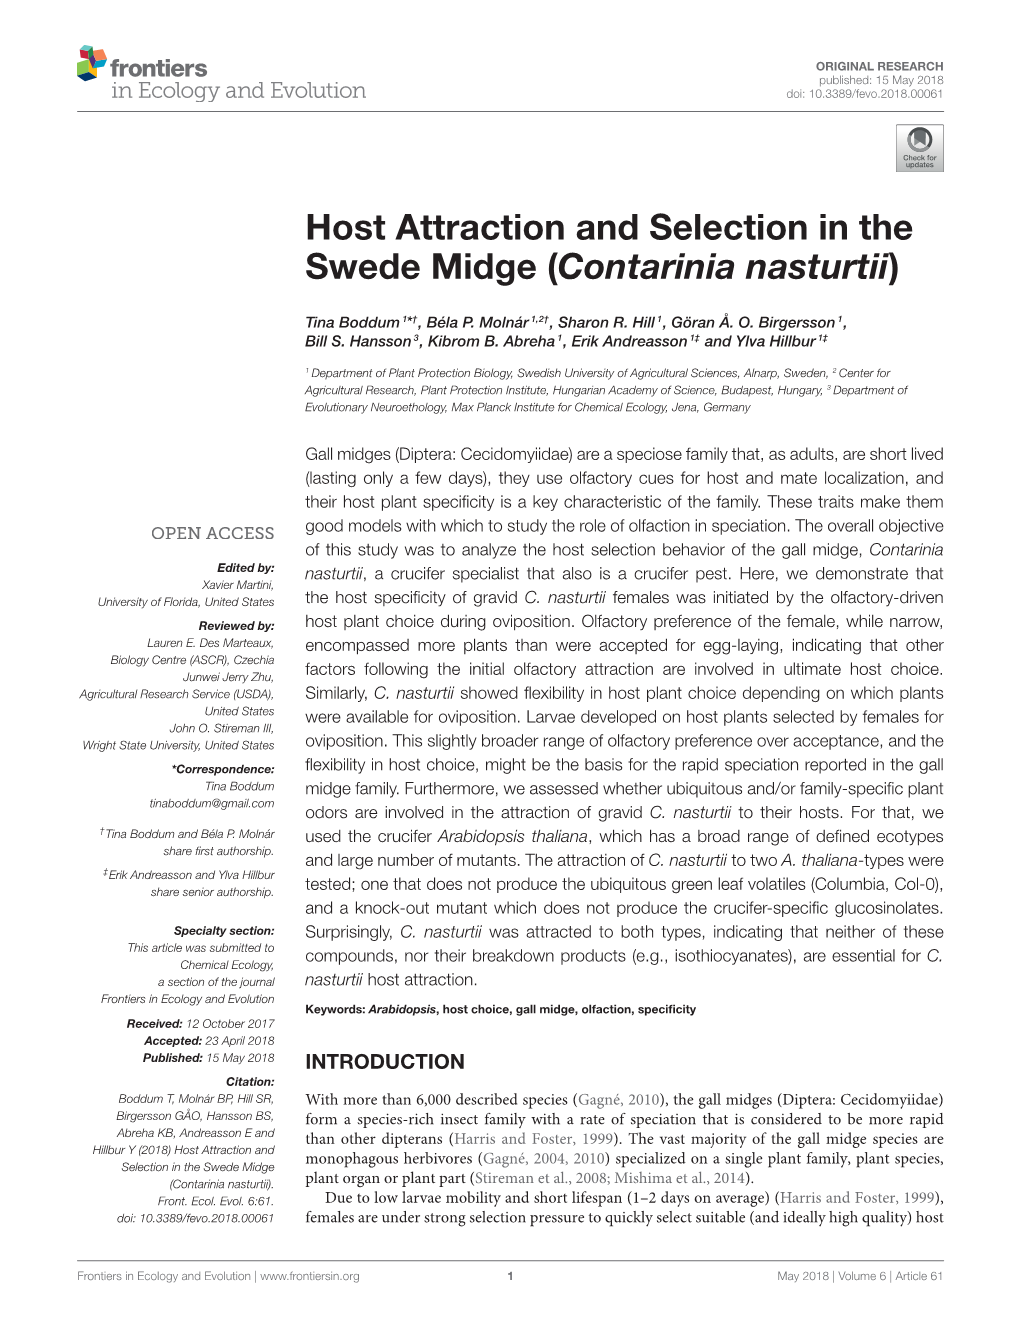 Host Attraction and Selection in the Swede Midge (Contarinia Nasturtii)